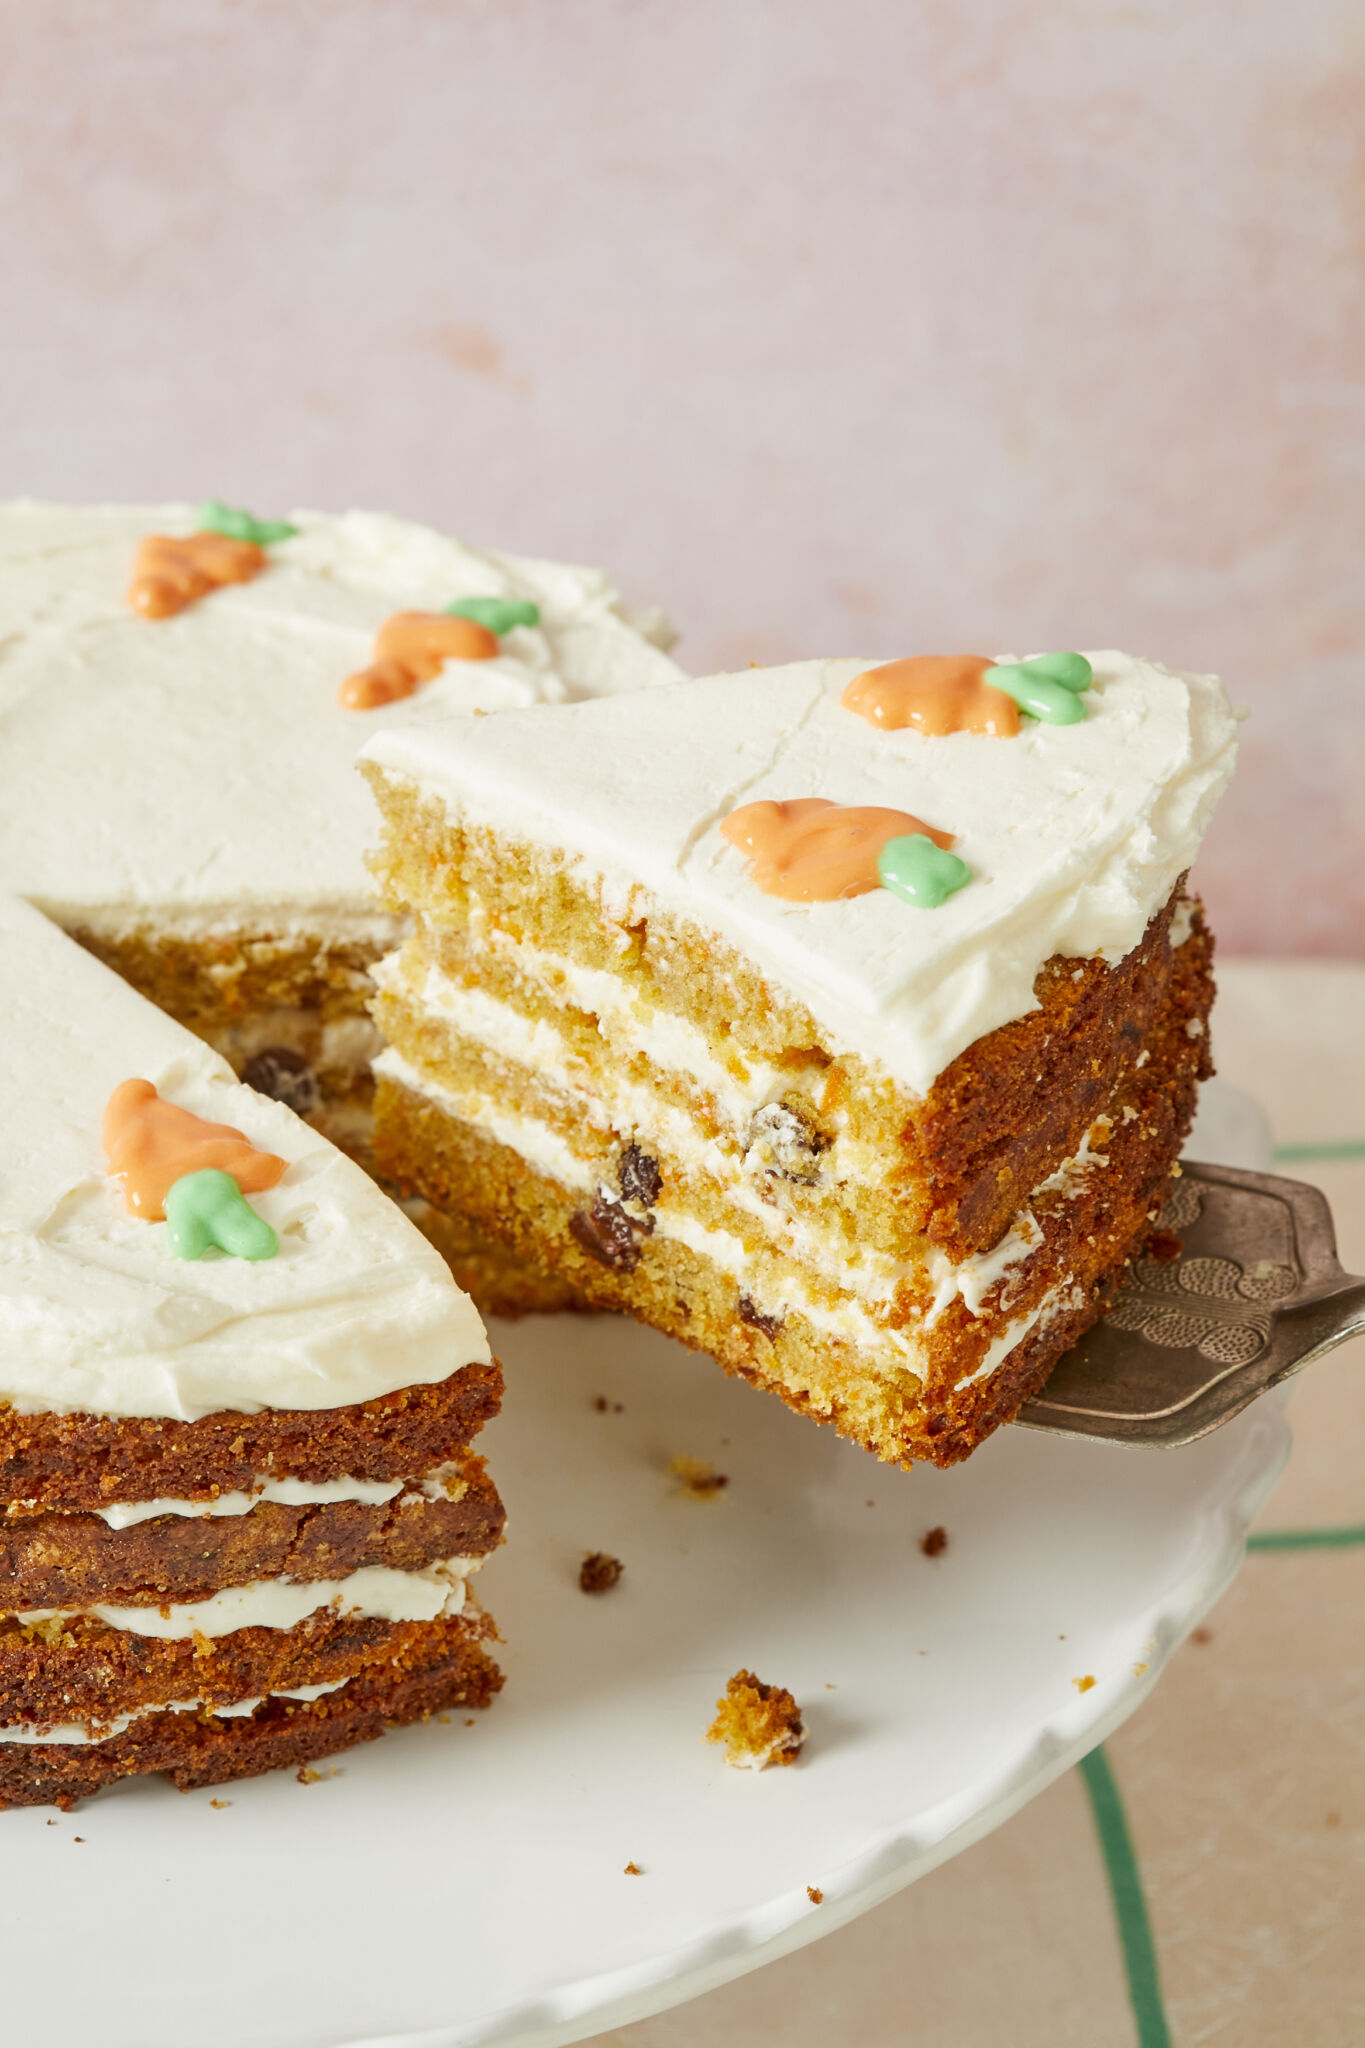 Layered Carrot Cake loaded with raisins and carrots, topped with creamy cream cheese frosting. A slice is cut and ready to serve. 